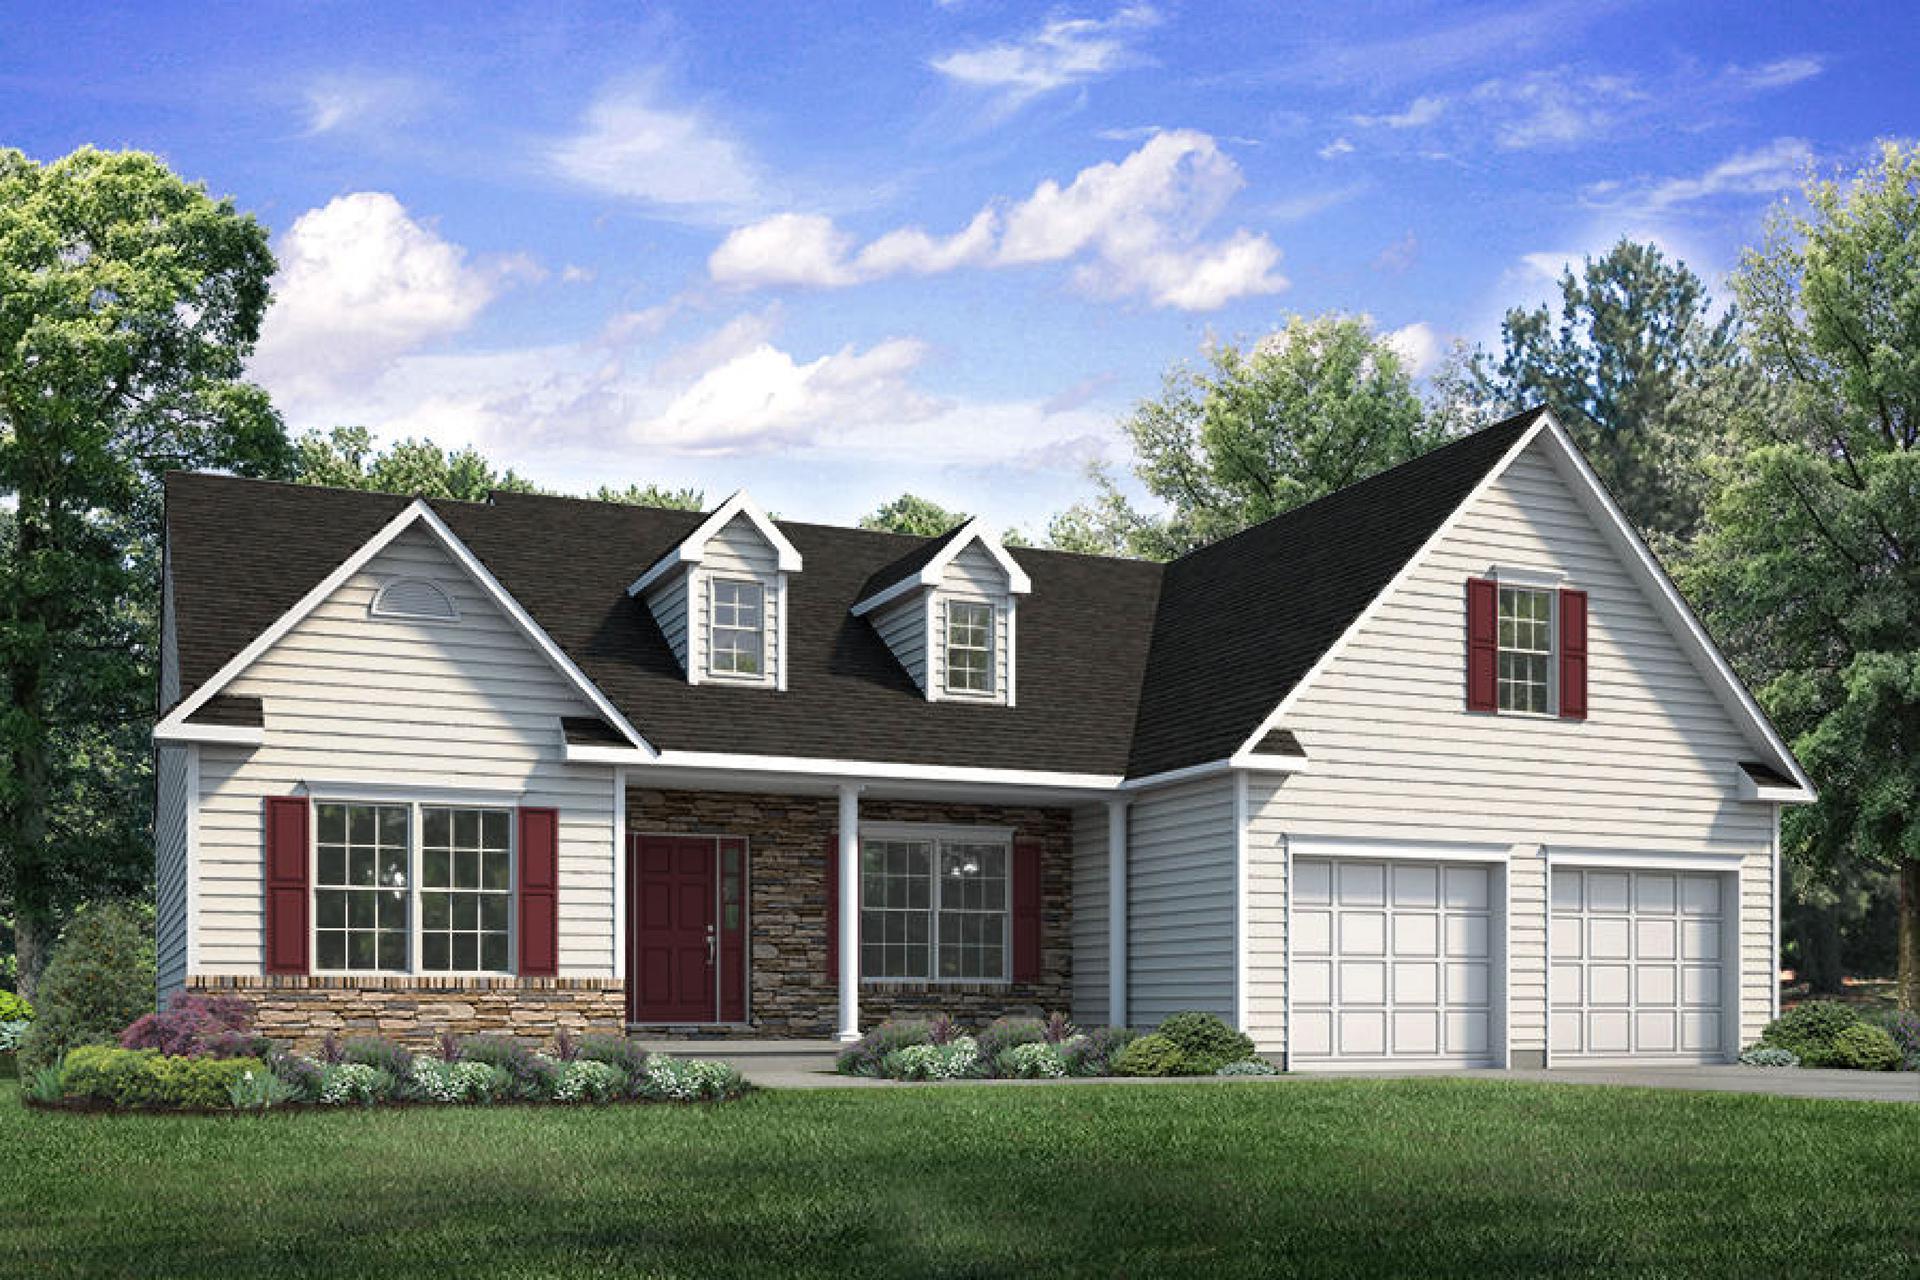 The St. Andrews New Home in White Haven PA - Golden Oaks Village